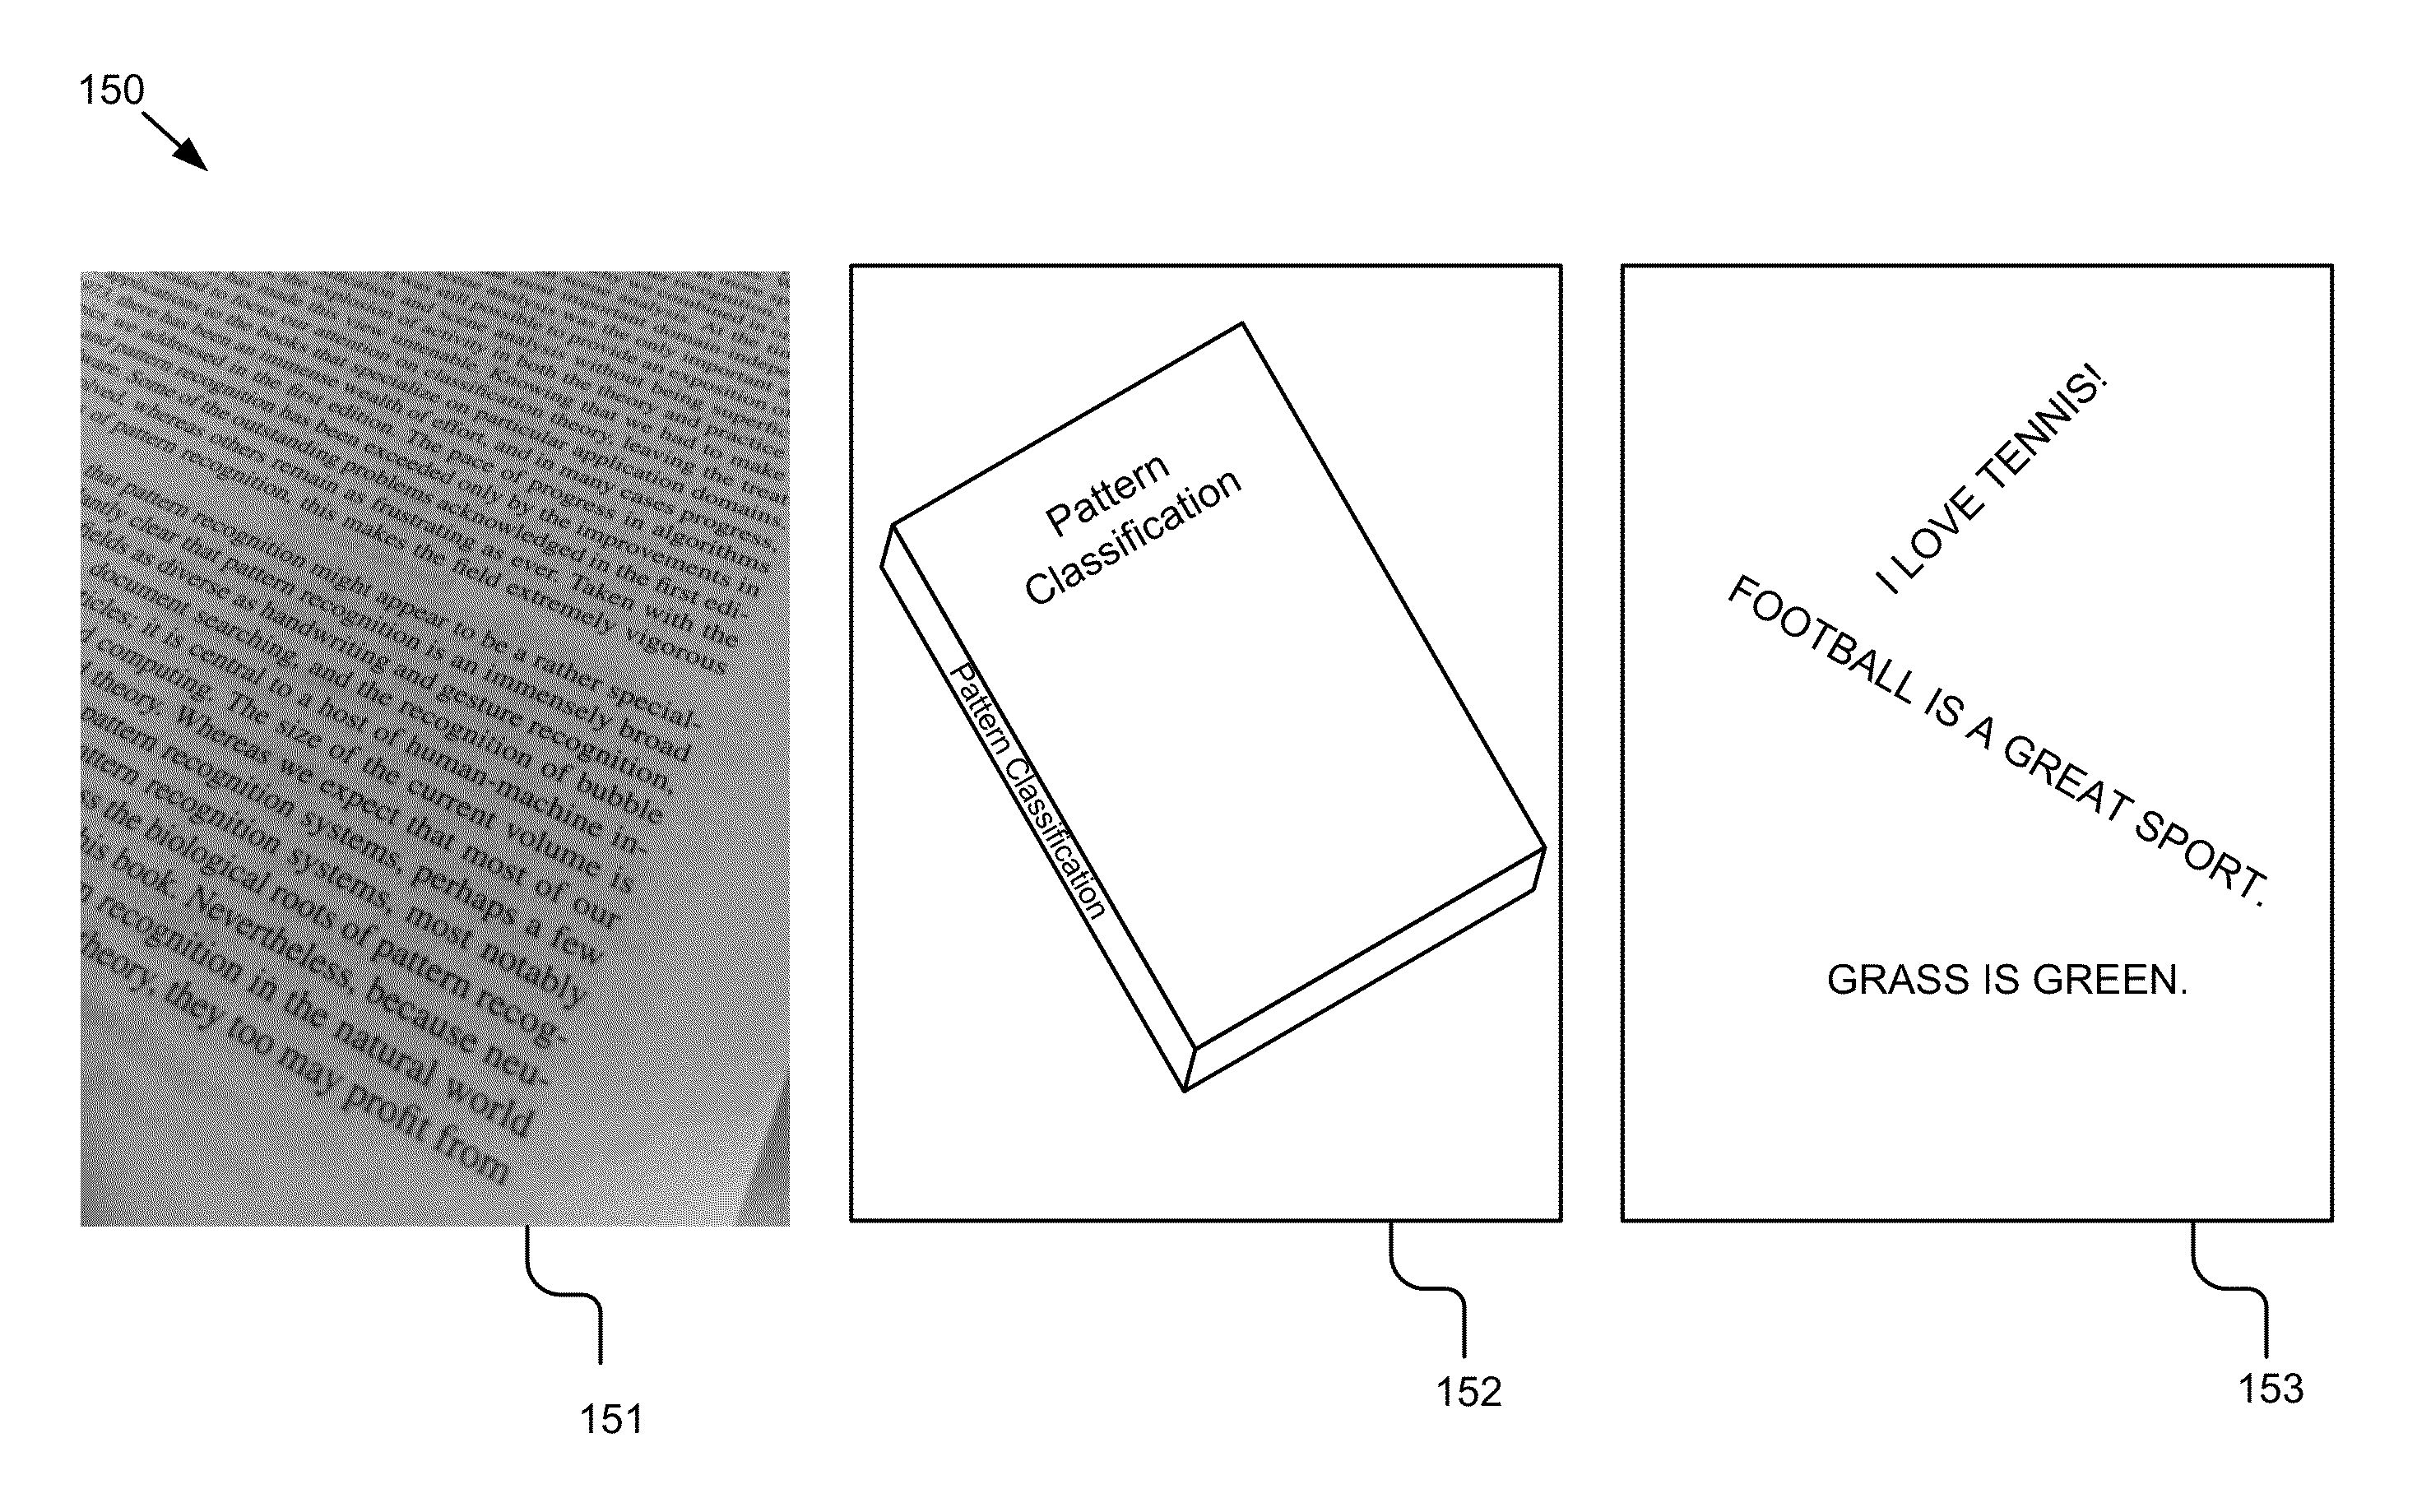 Local Scale, Rotation and Position Invariant Word Detection for Optical Character Recognition